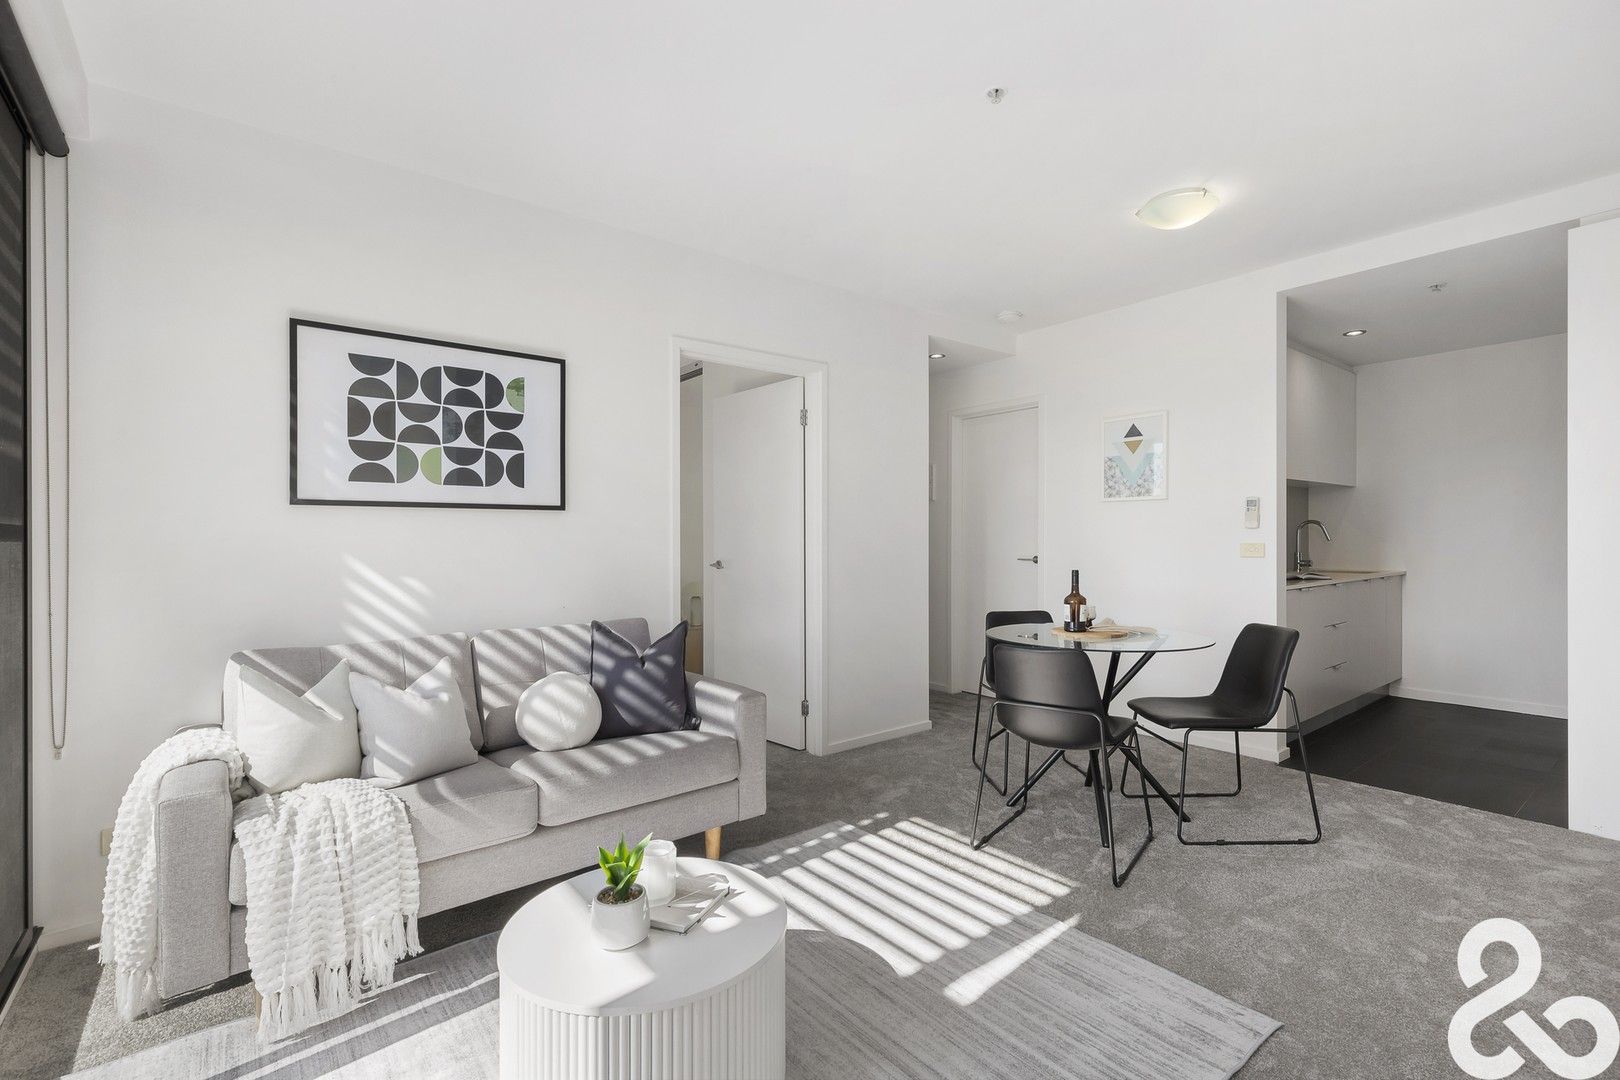 2 bedrooms Apartment / Unit / Flat in 7/94 Union Street NORTHCOTE VIC, 3070